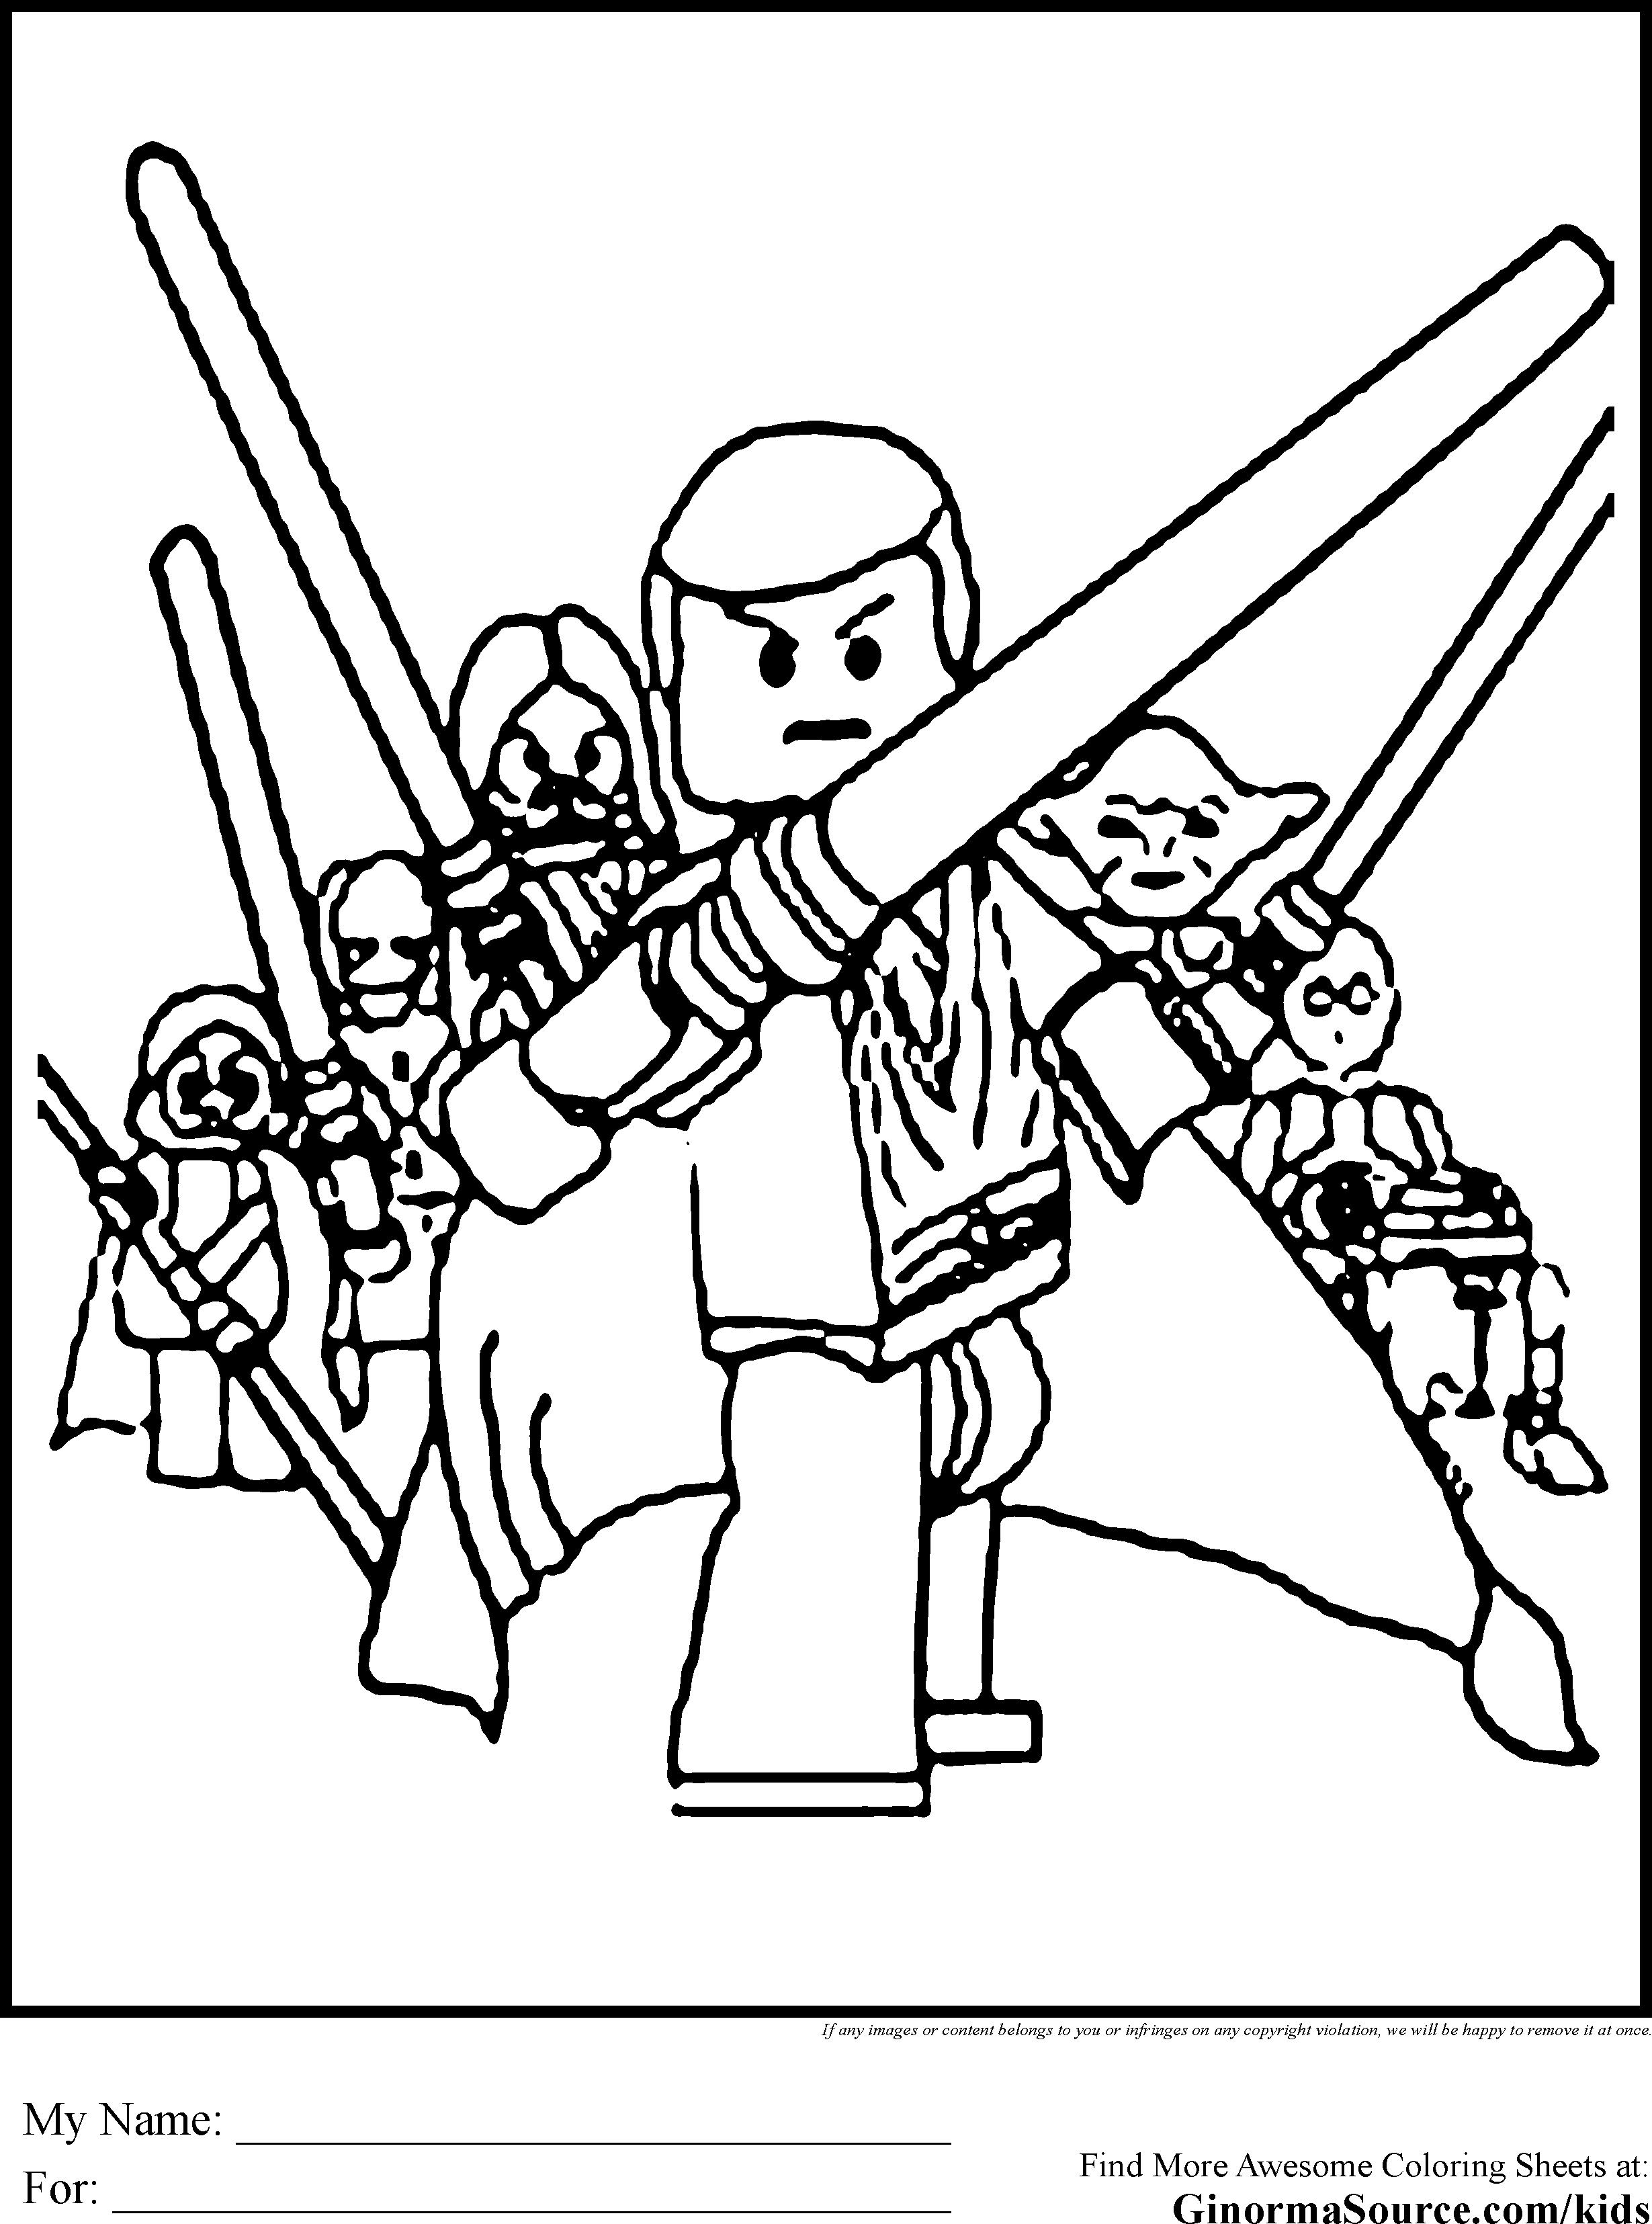 Anime Star Wars Coloring Pages - Coloring Pages For All Ages